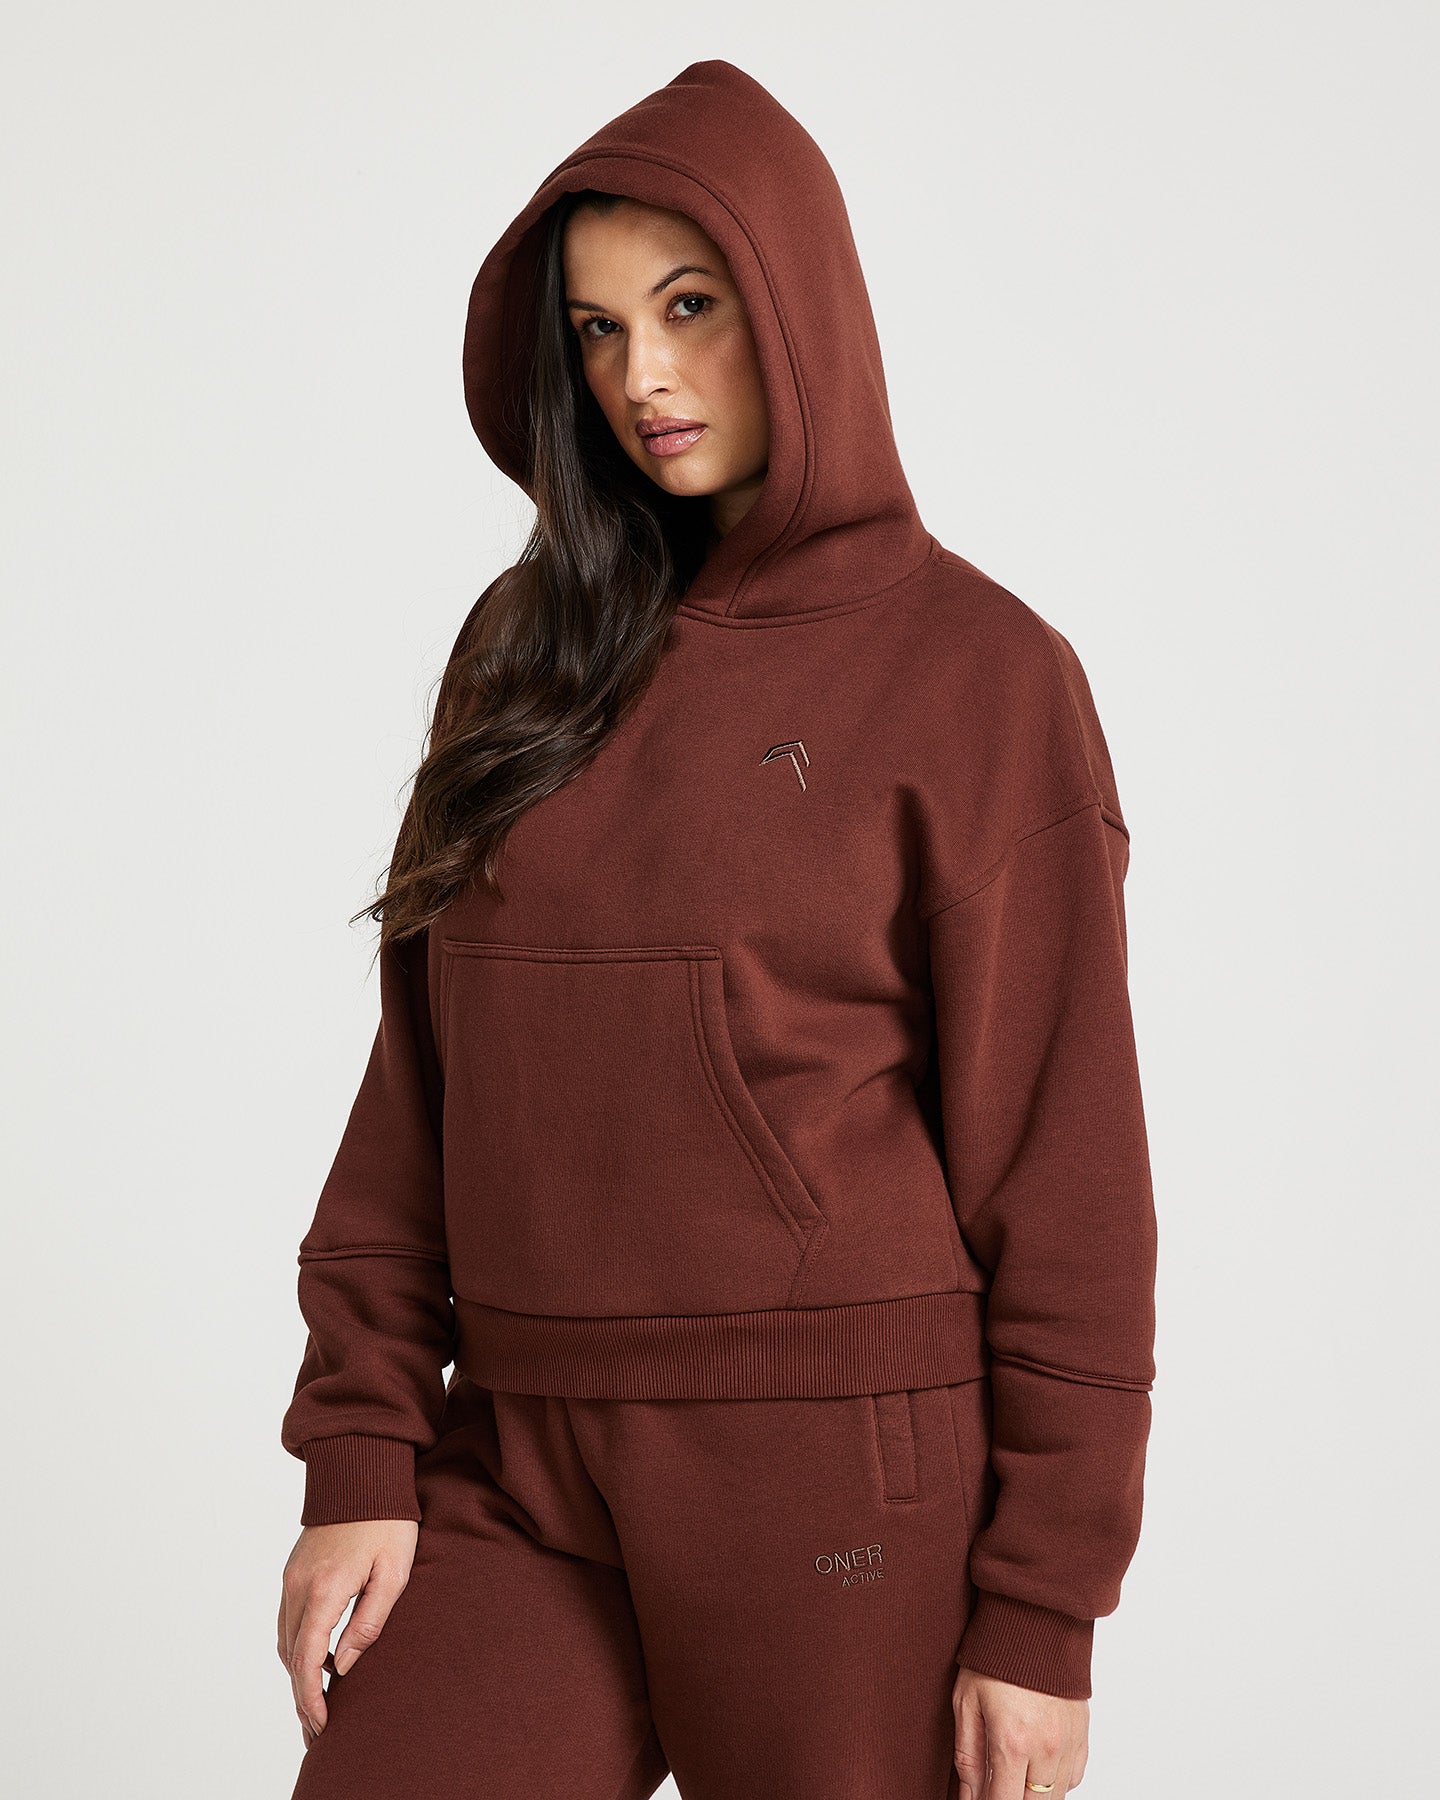 Sports Hoodie for Active US WOMEN | Oner